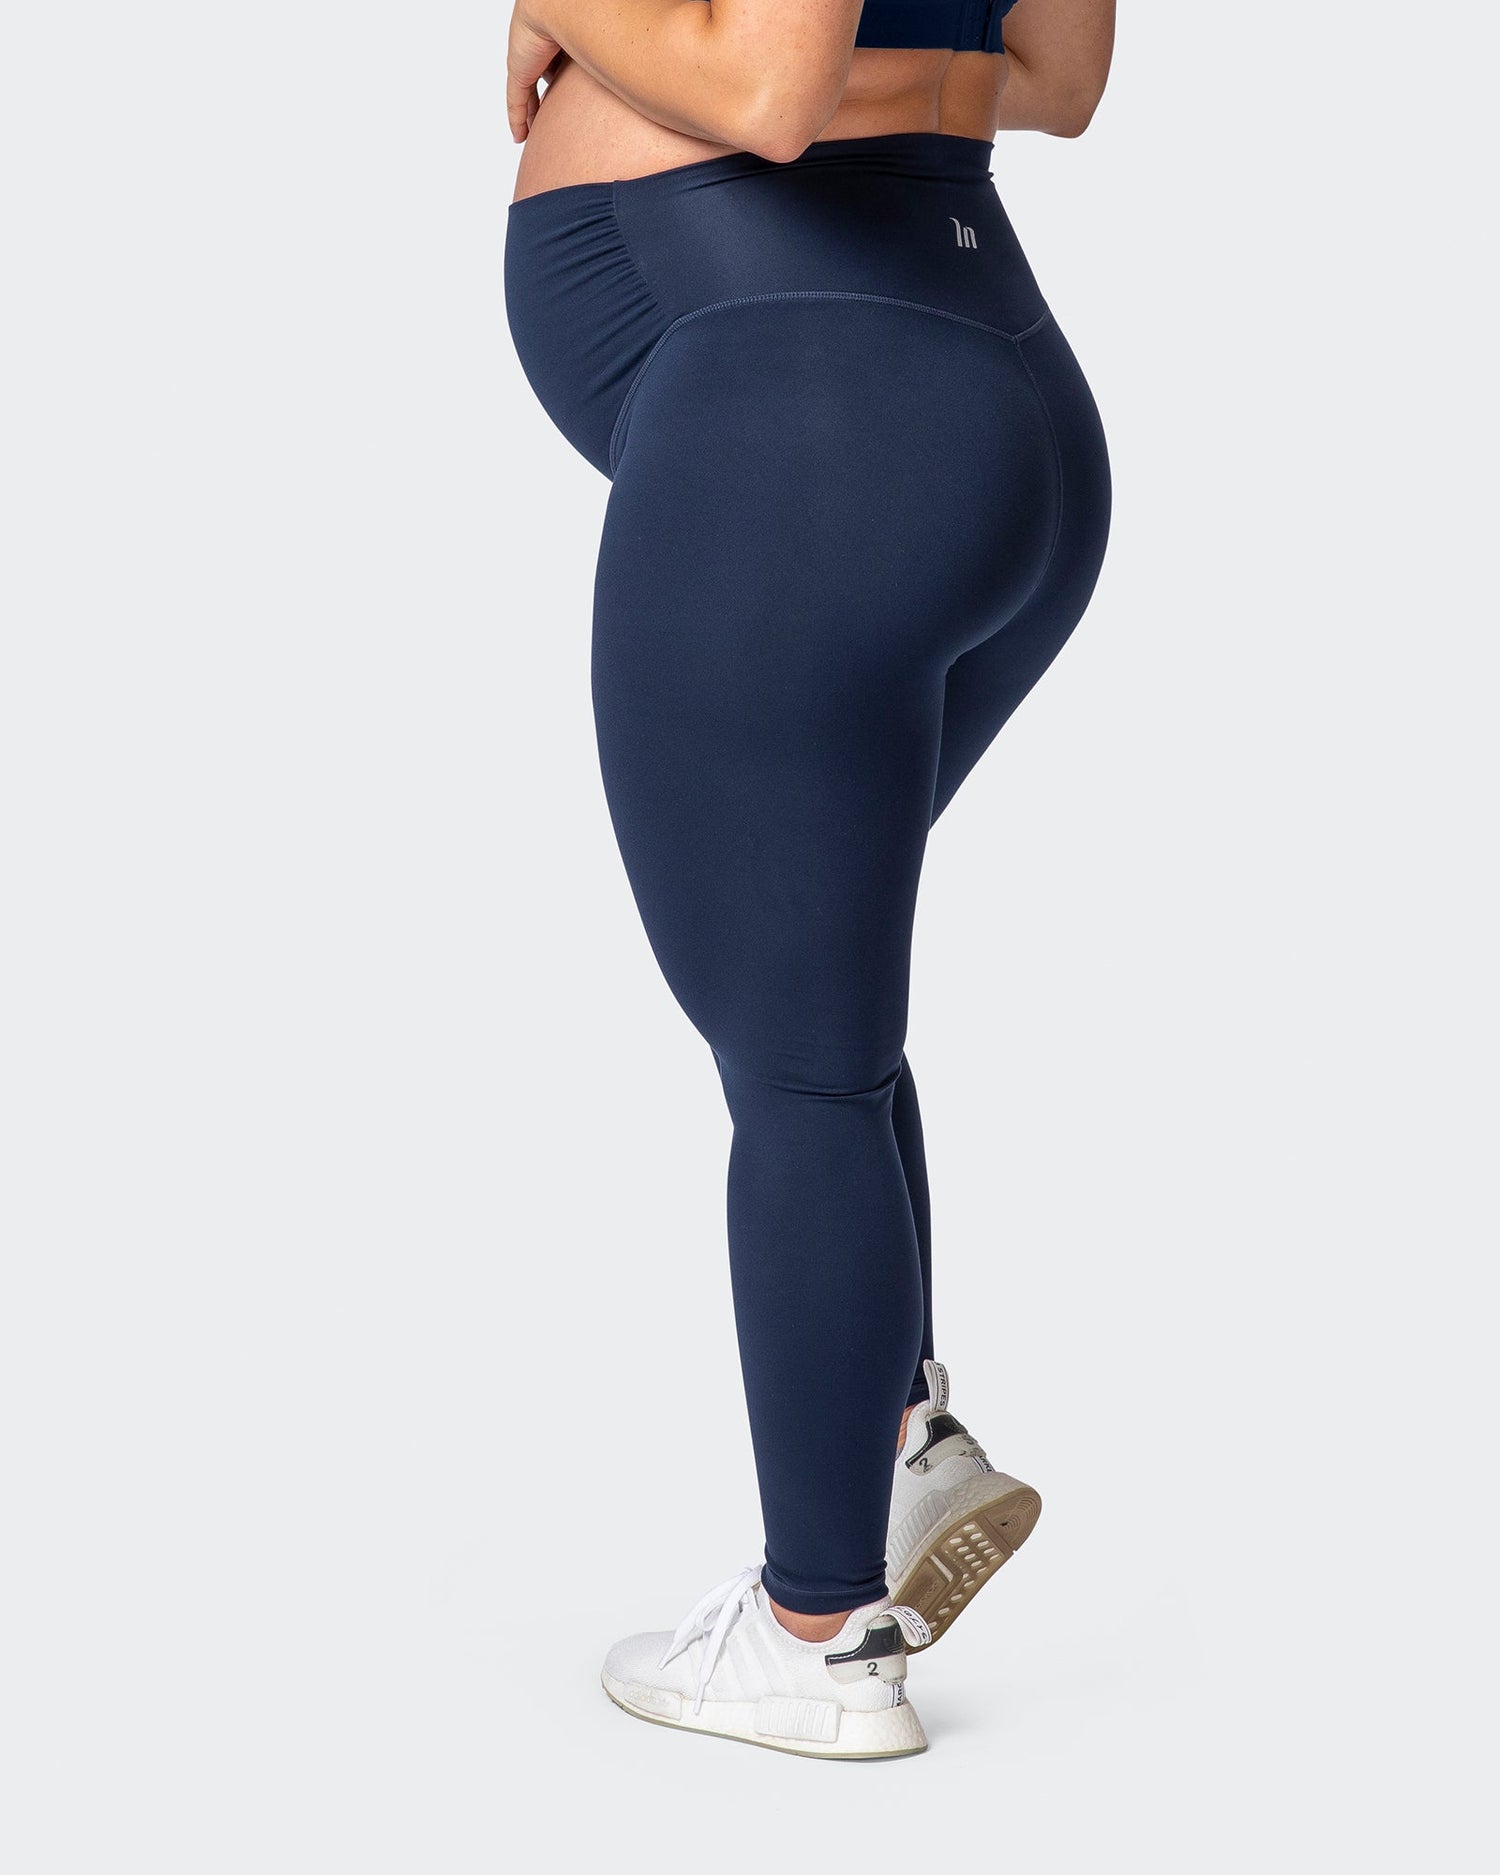 Maternity Everyday Leggings - Navy - Muscle Nation